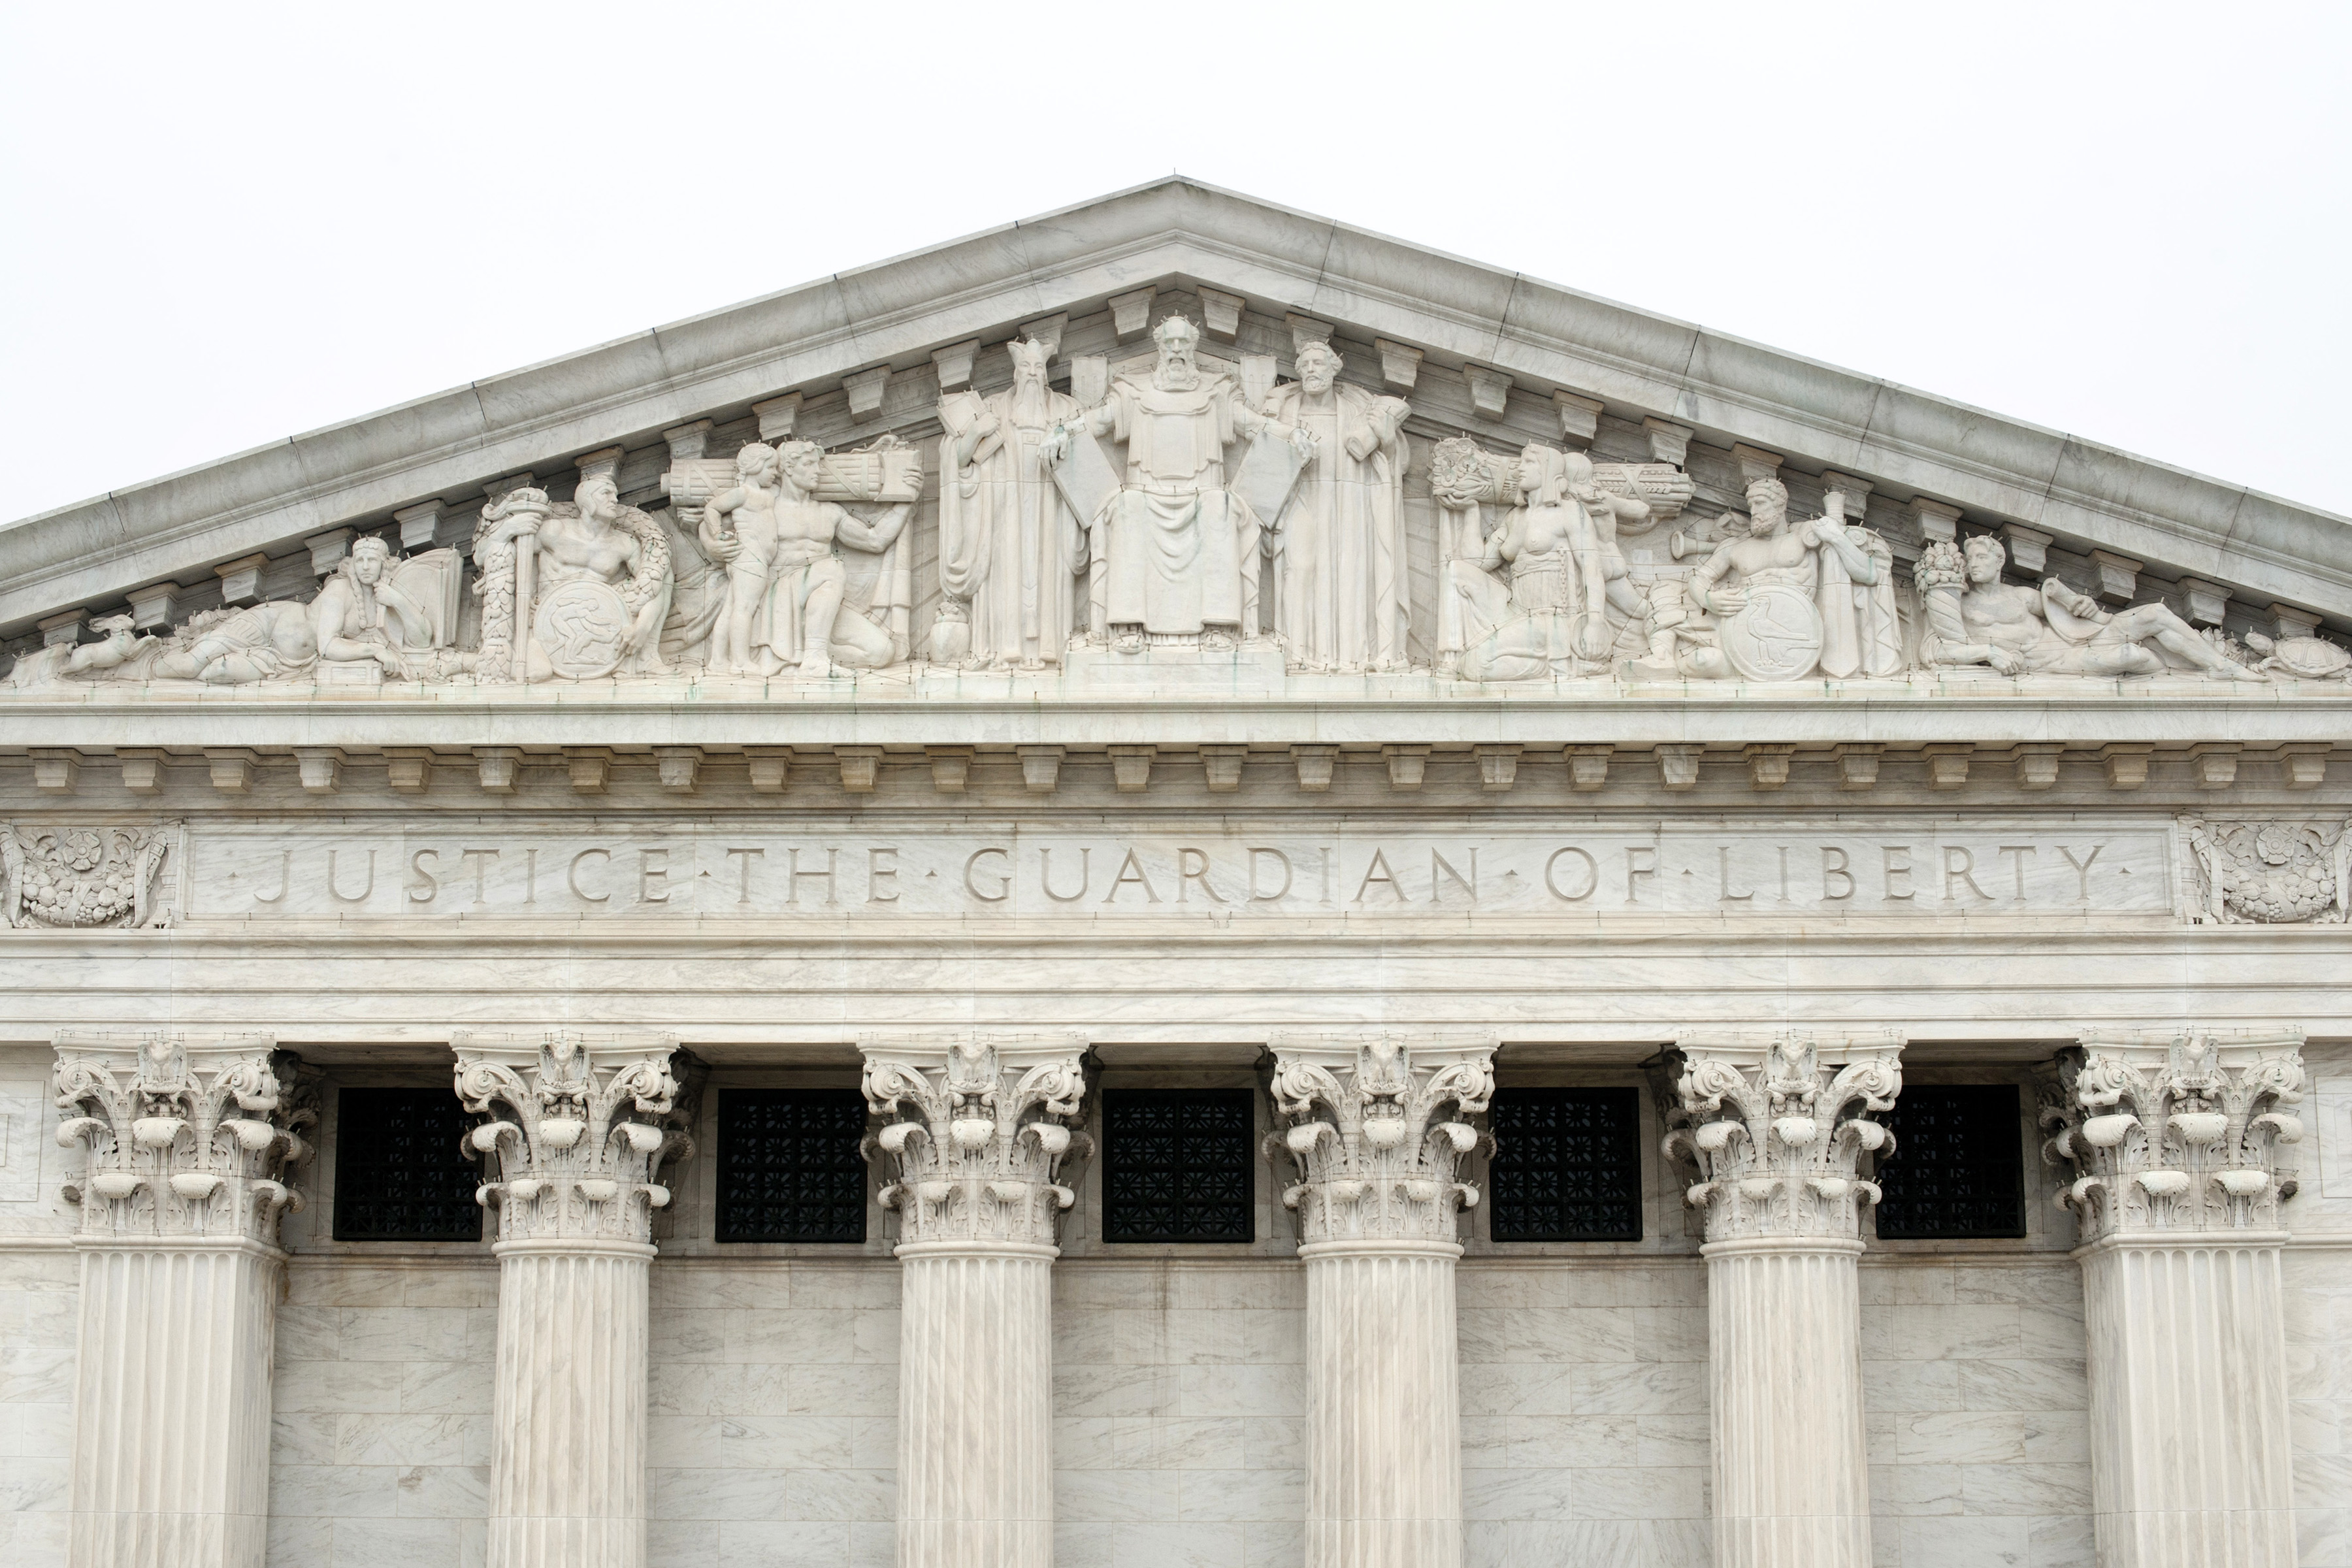 A carving of Moses receiving The Ten Commandments on the facade of the US Supreme Court building in Washington, DC.